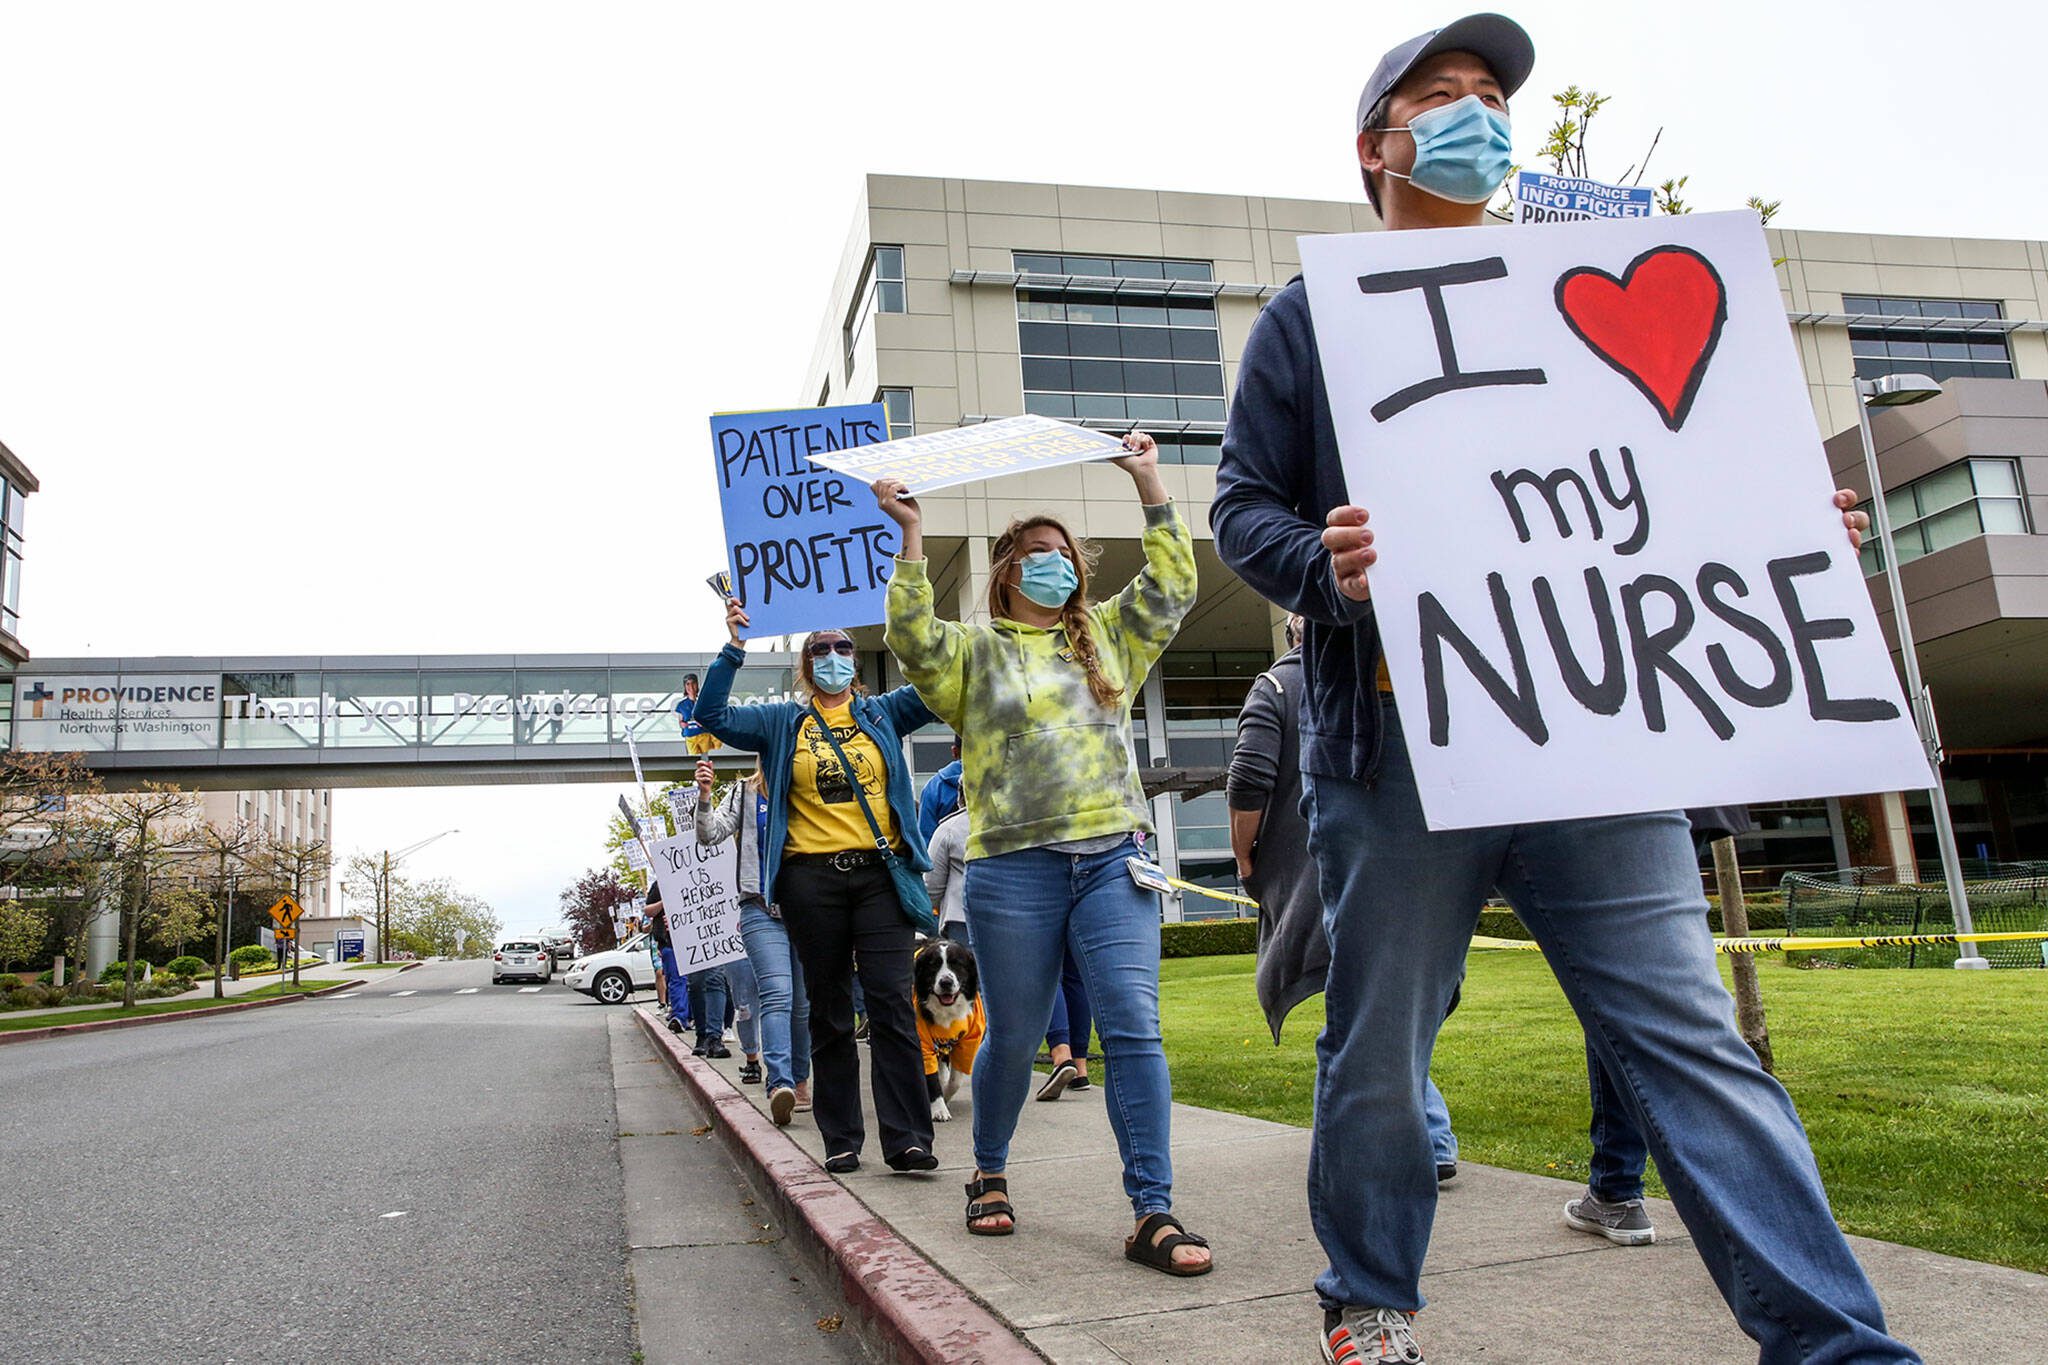 Supporters of nurses march across from Providence Medical Center on May 5, 2021 in in Everett, Washington. (Kevin Clark / The Herald)